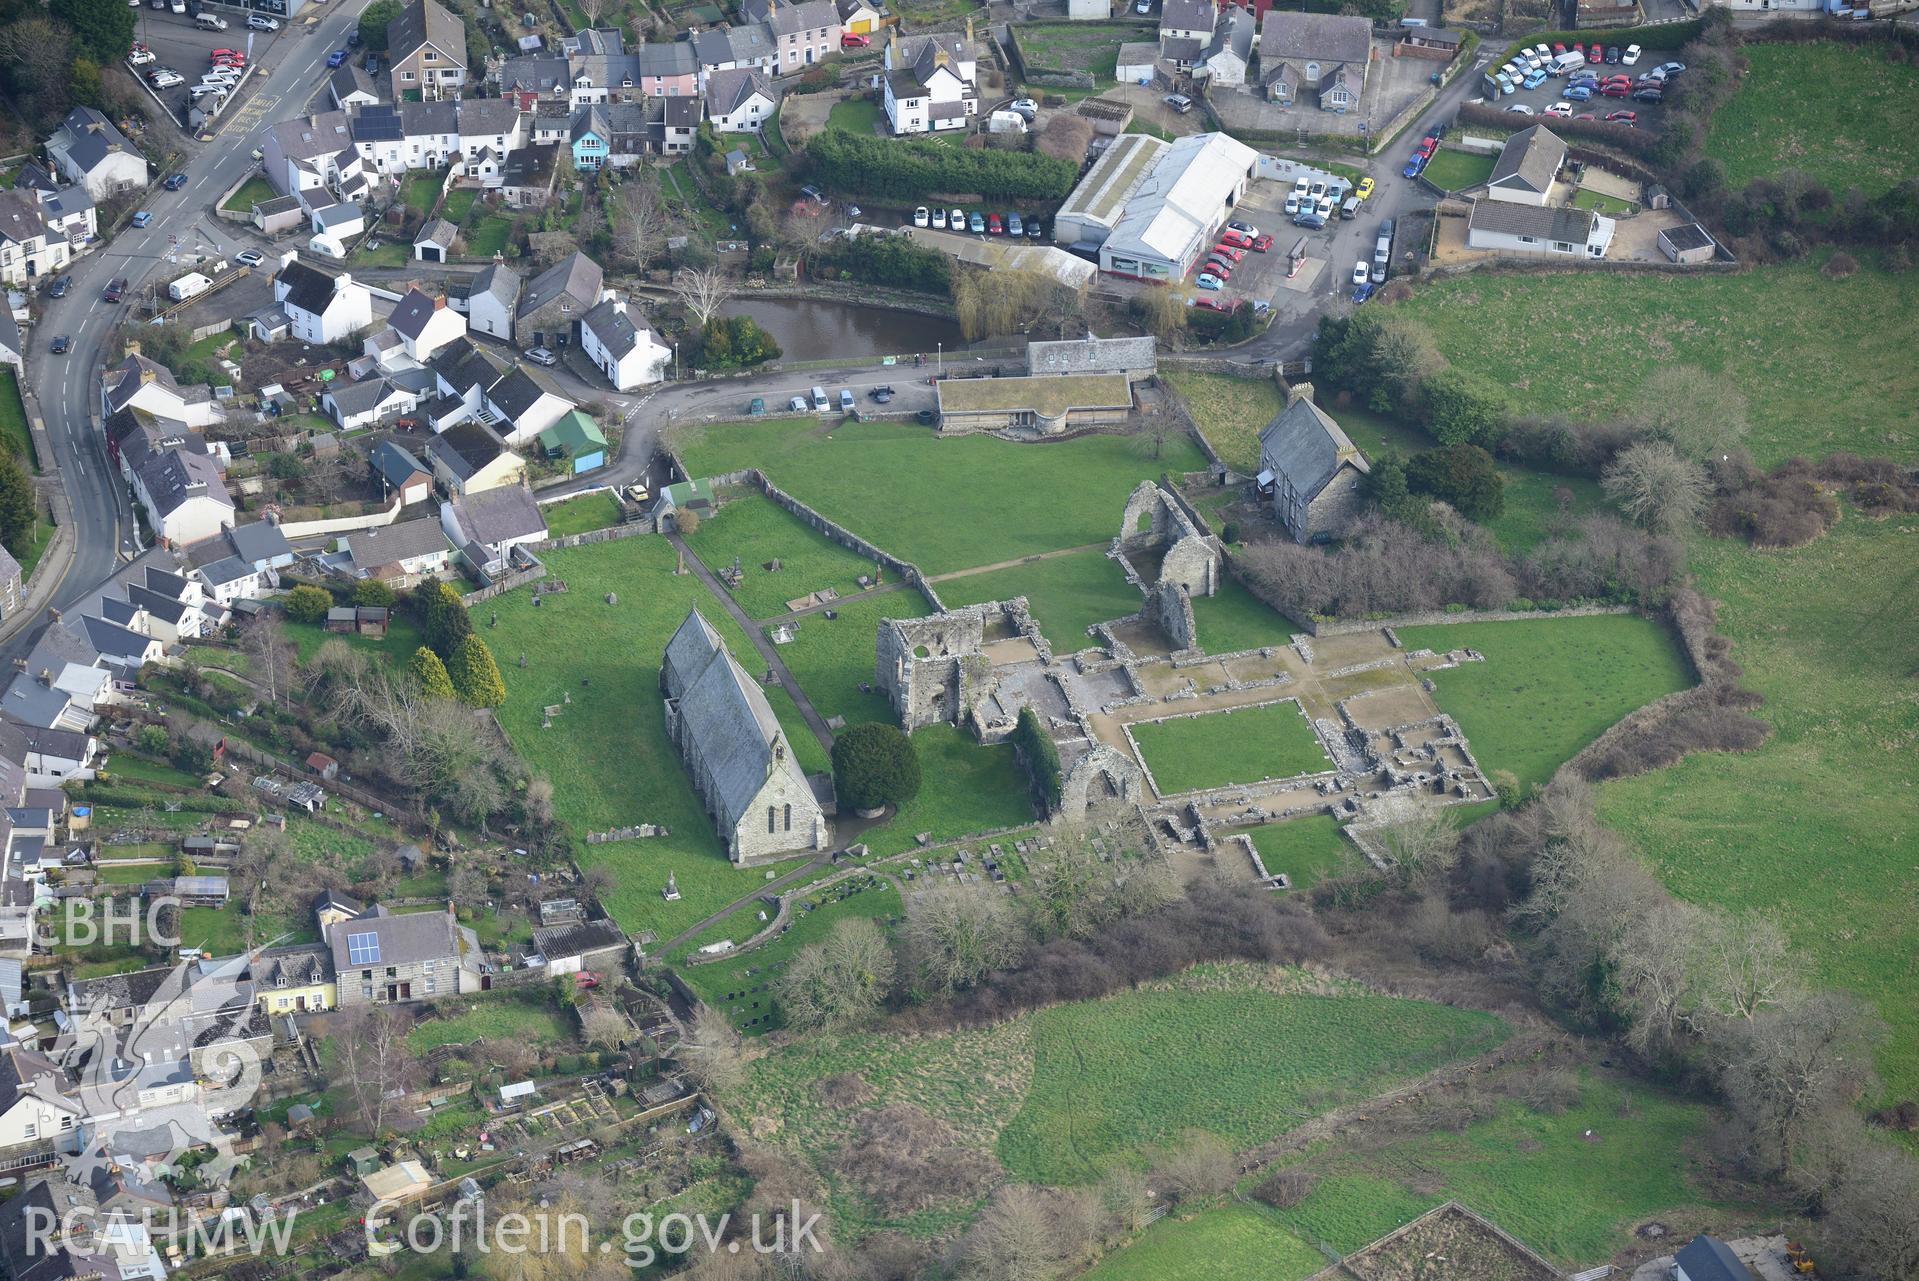 St. Dogmael's Abbey; St. Thomas the Apostle Church; The Vicarage and the Vicarage Stables and Coach House, St. Dogmaels. Oblique aerial photograph taken during the Royal Commission's programme of archaeological aerial reconnaissance by Toby Driver on 13th March 2015.